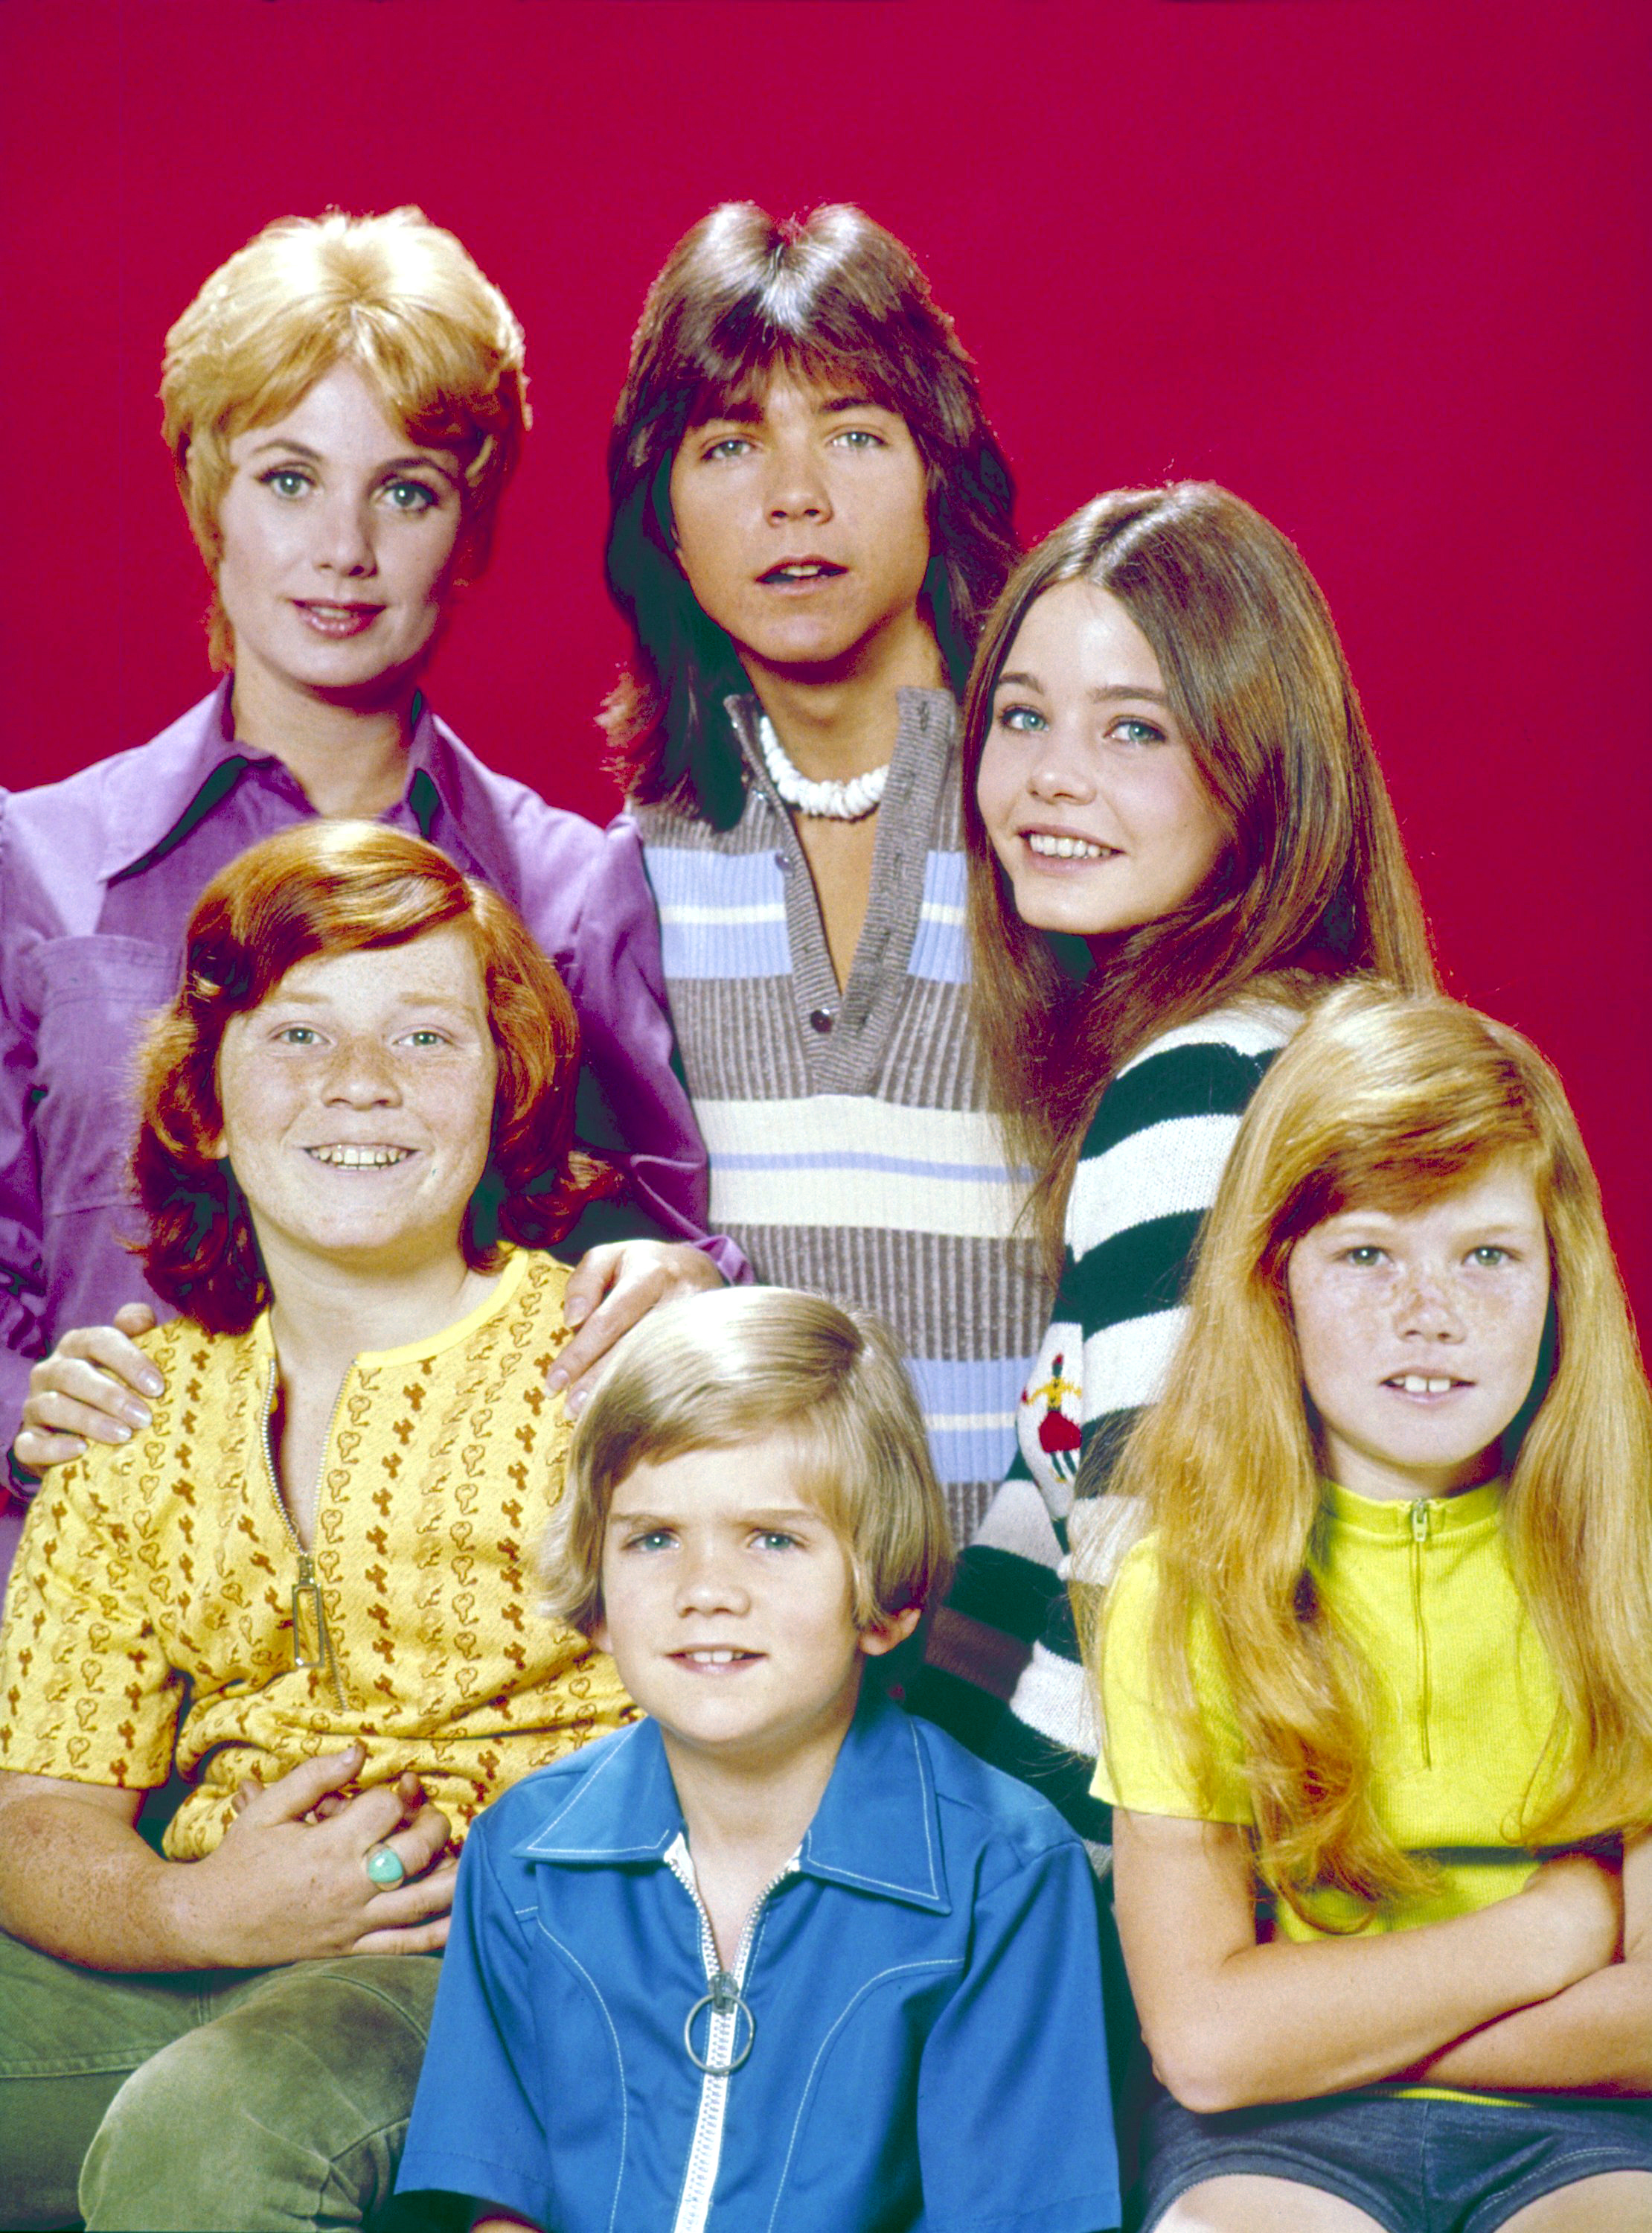 Shirley Jones, David Cassidy, Susan Dey; Danny Bonaduce, Brian Forster, Suzanne Crough on the set of "The Partridge Family" in 1972 | Source: Getty Images